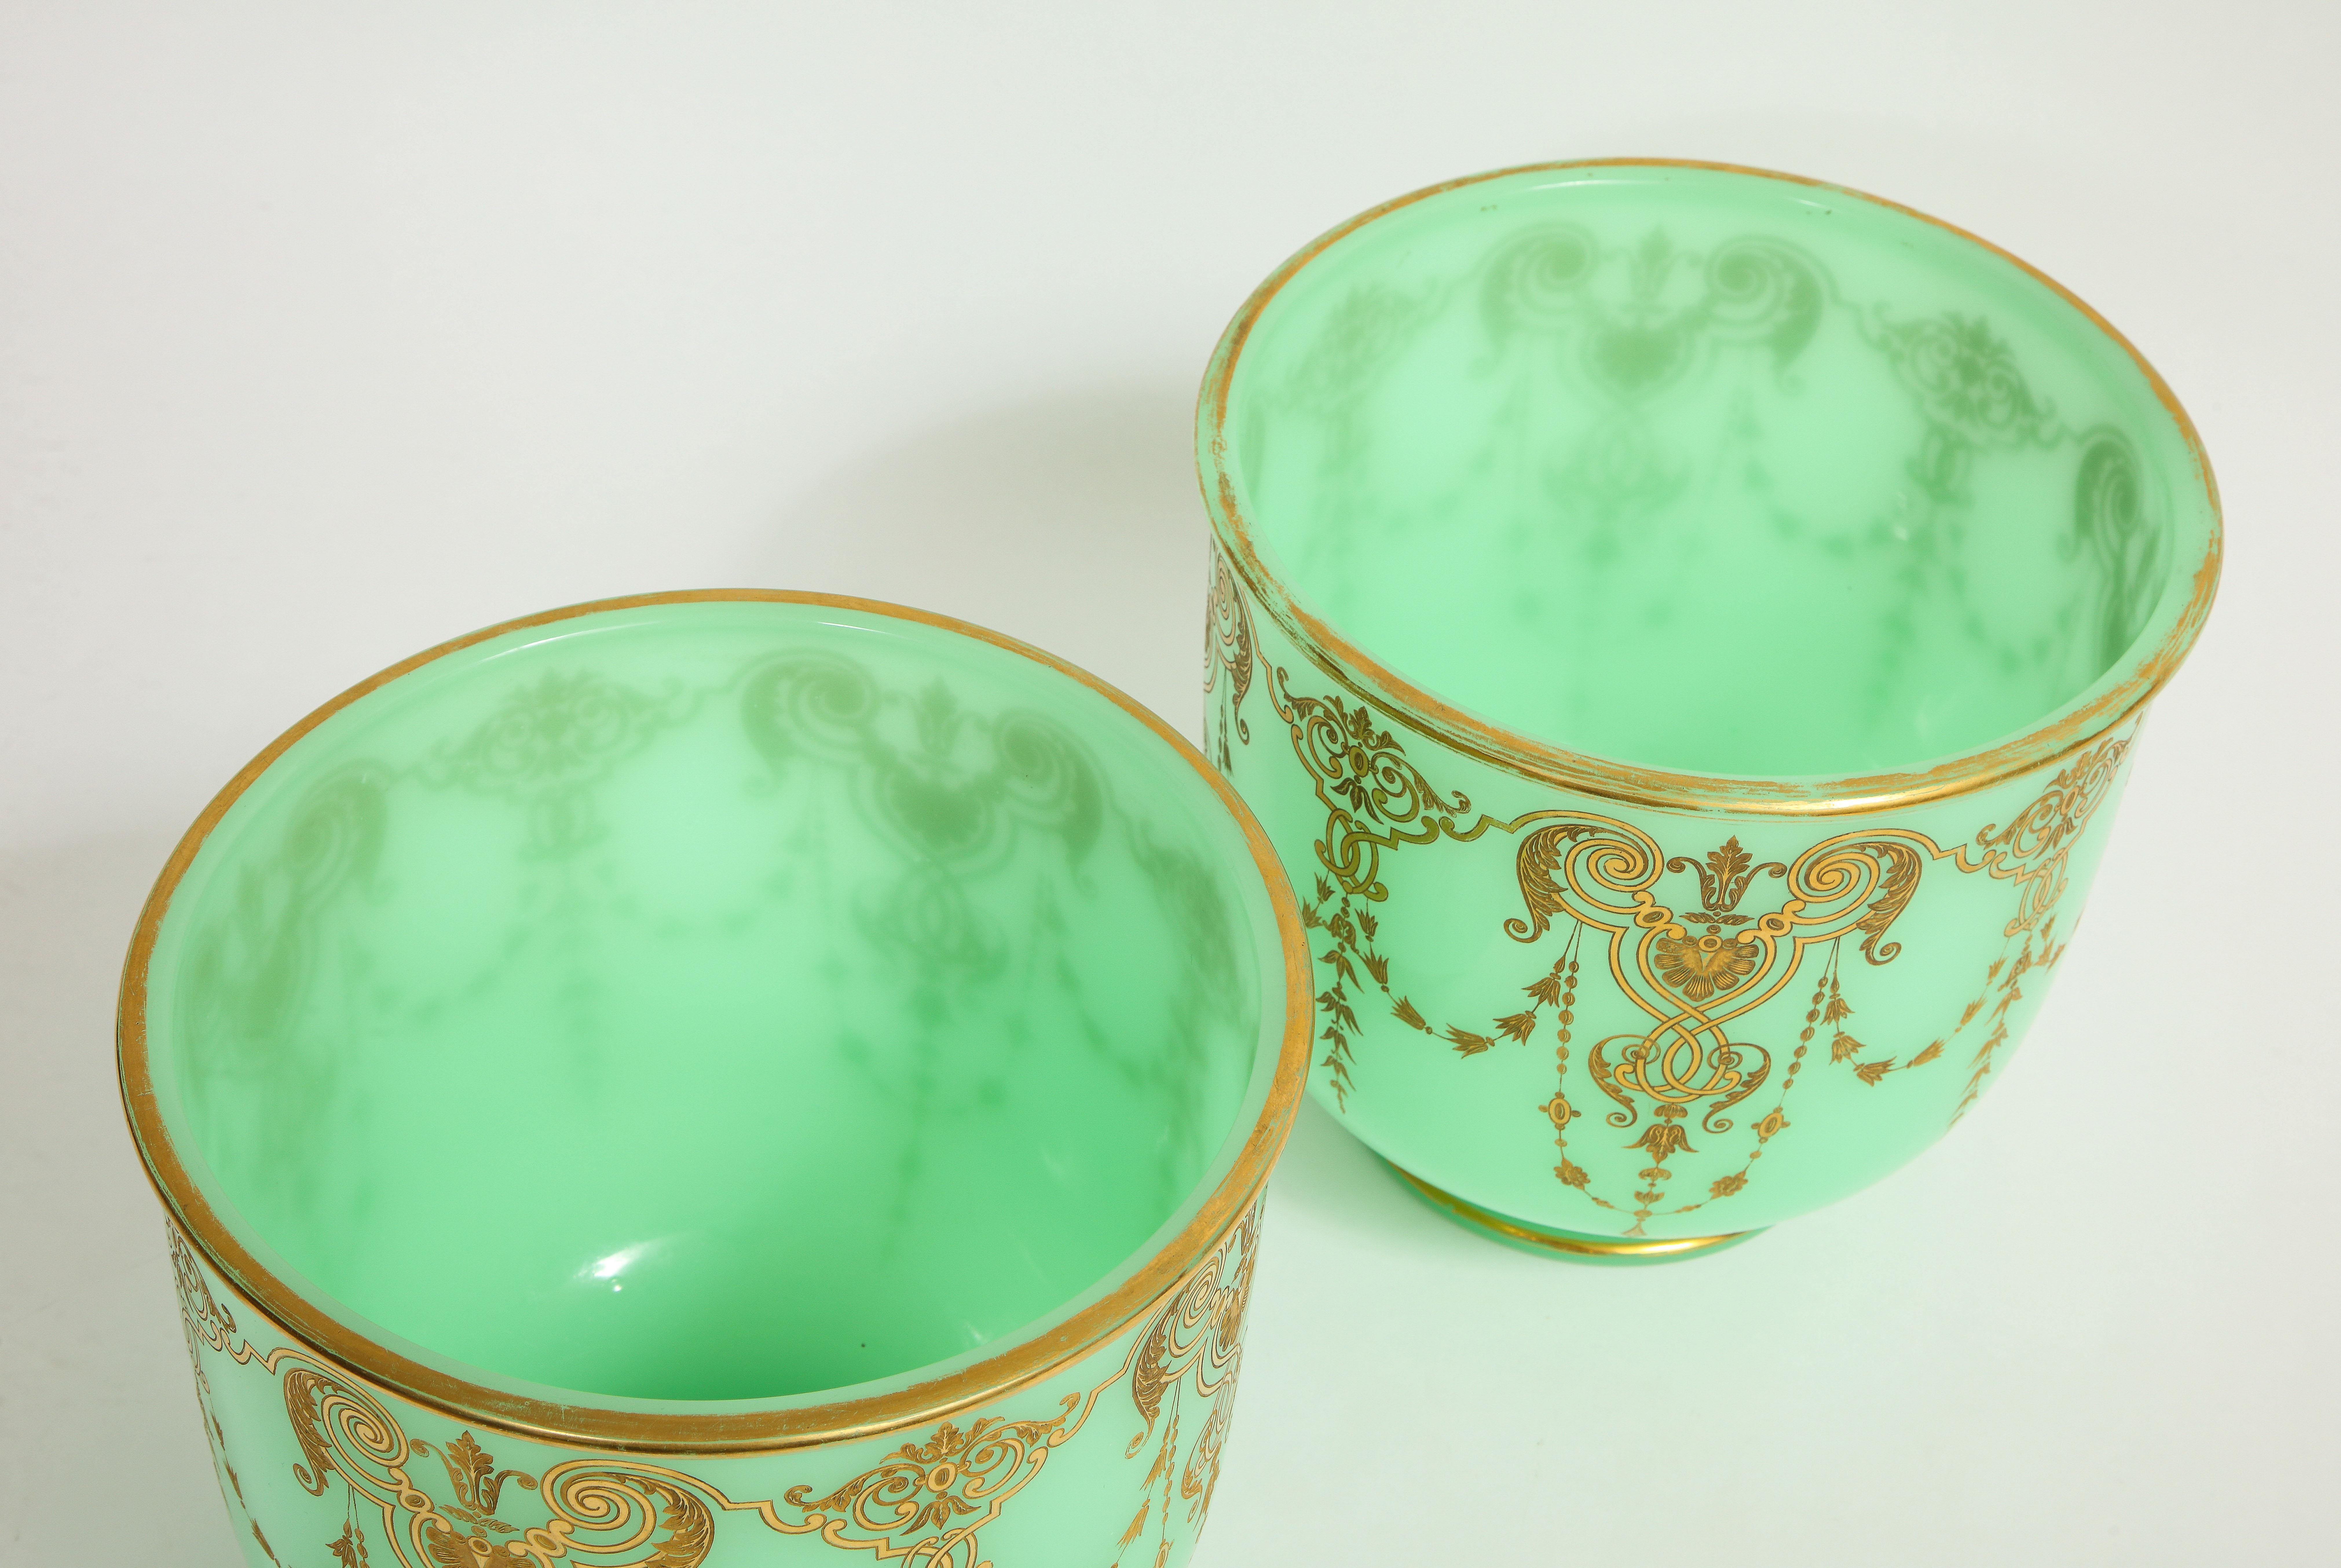 Pair of 19th C. French Green Opaline Crystal Cachepots Engraved Gilt Decoration For Sale 3